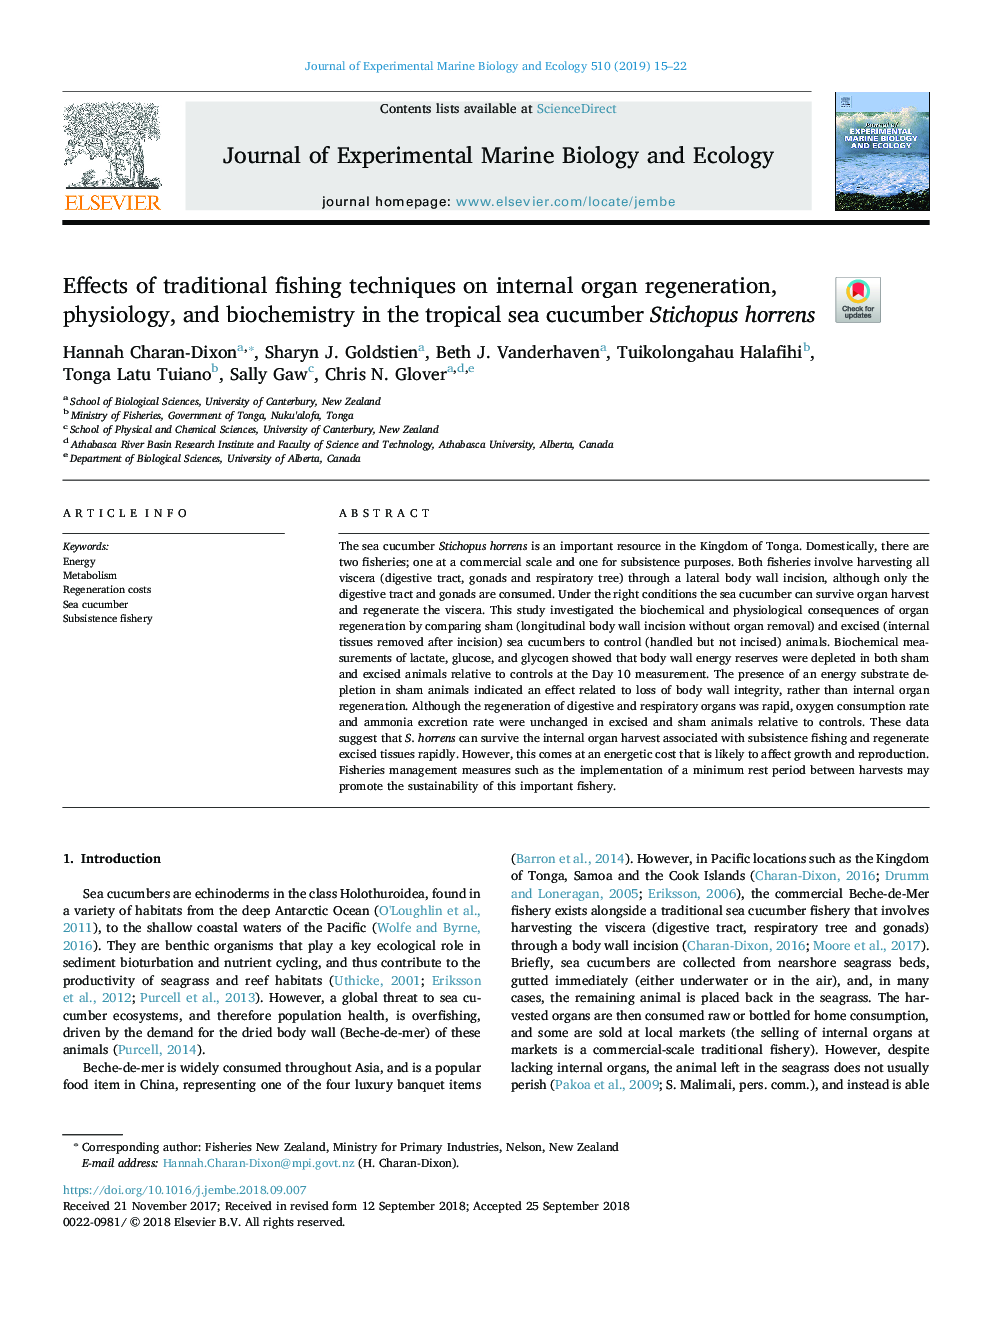 Effects of traditional fishing techniques on internal organ regeneration, physiology, and biochemistry in the tropical sea cucumber Stichopus horrens